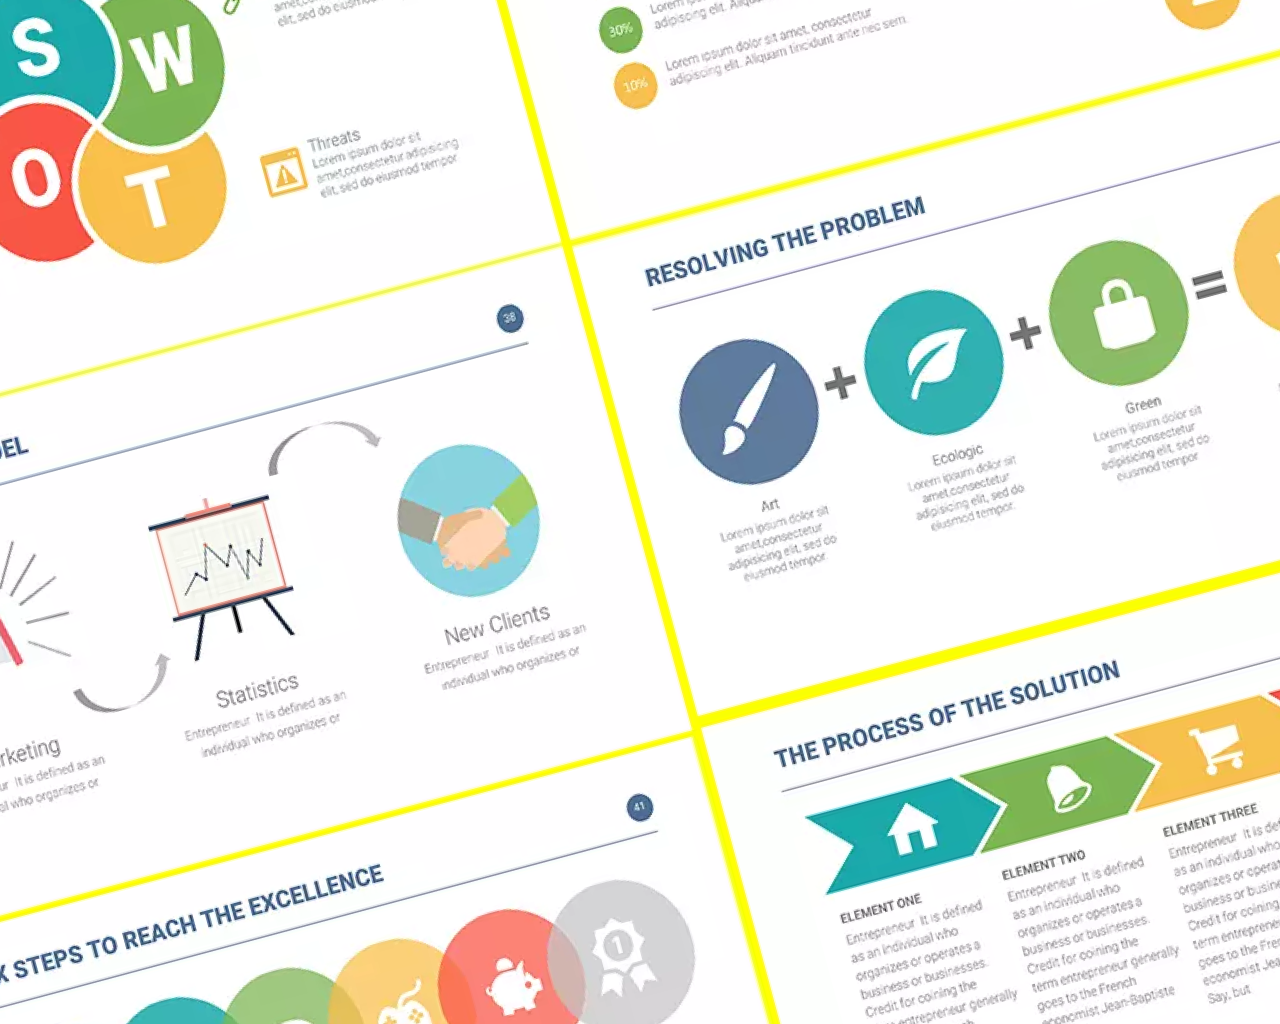 7 Best Powerpoint Templates To Use For Professional Business Presentations 9